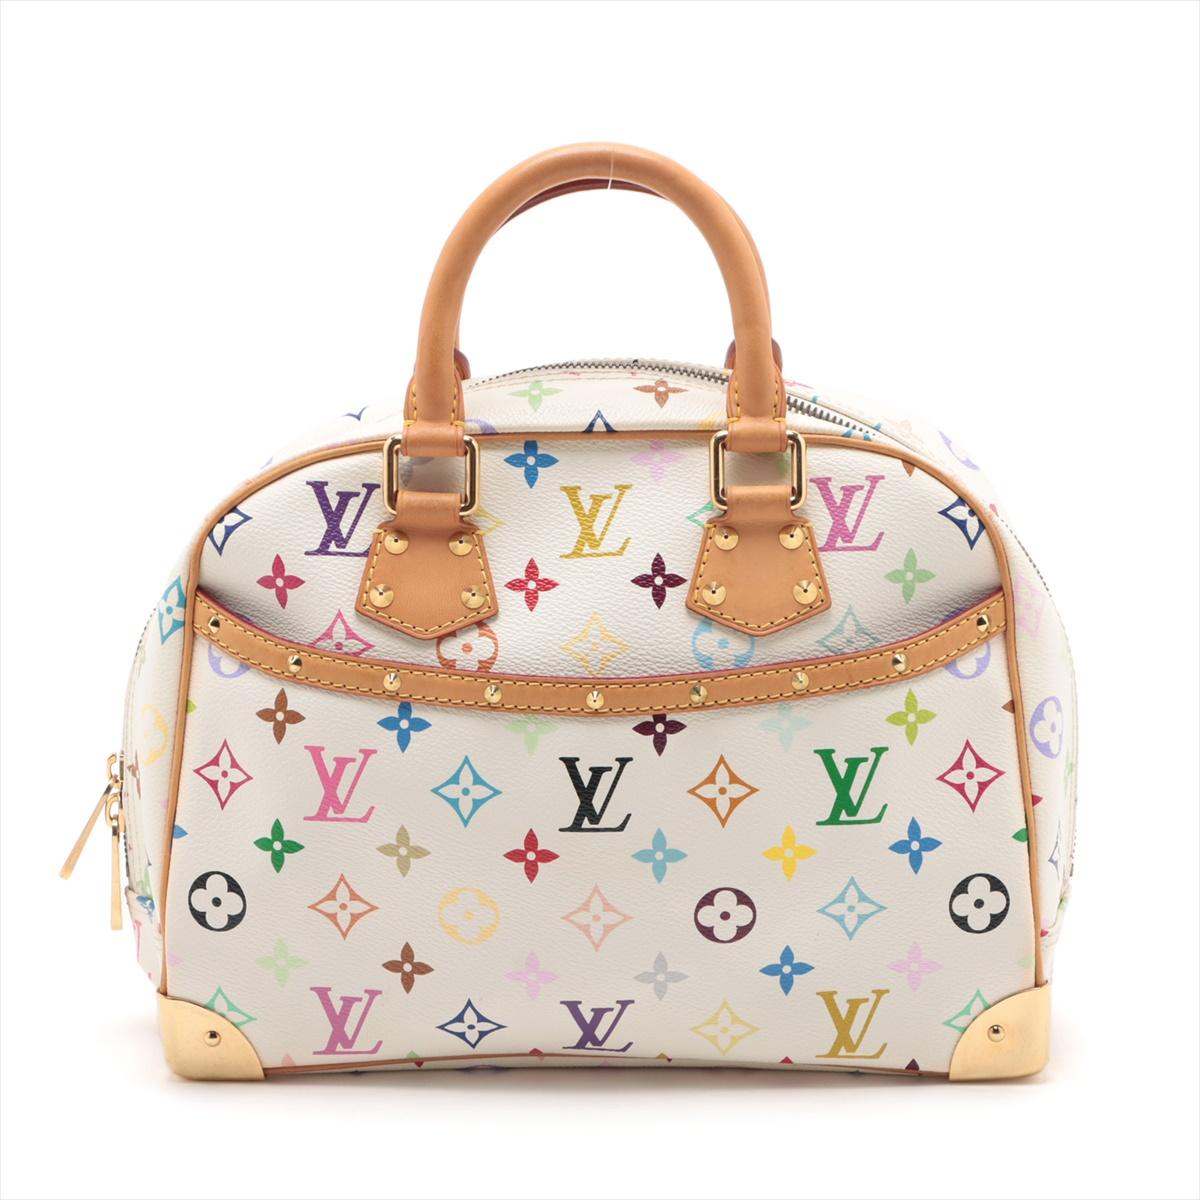 The Louis Vuitton Multicolor Trouville Handbag in White exudes timeless elegance and sophistication. The iconic piece seamlessly blends luxury and functionality. The signature monogram canvas is adorned with a vibrant multicolor pattern, creating a